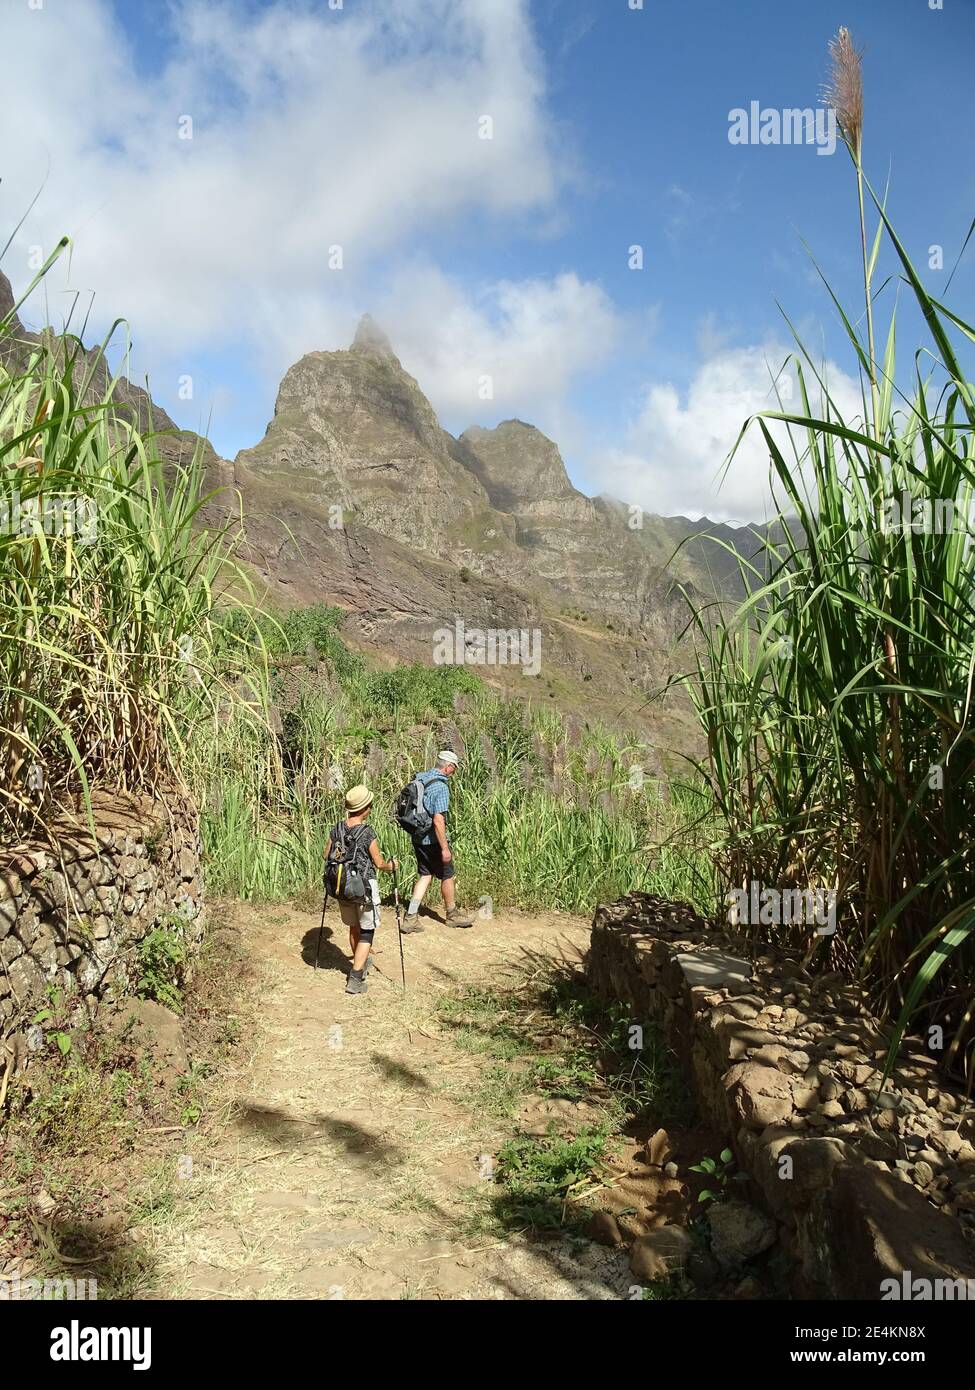 Two people hiking at Cape Verde, Santo Antao island. Stock Photo